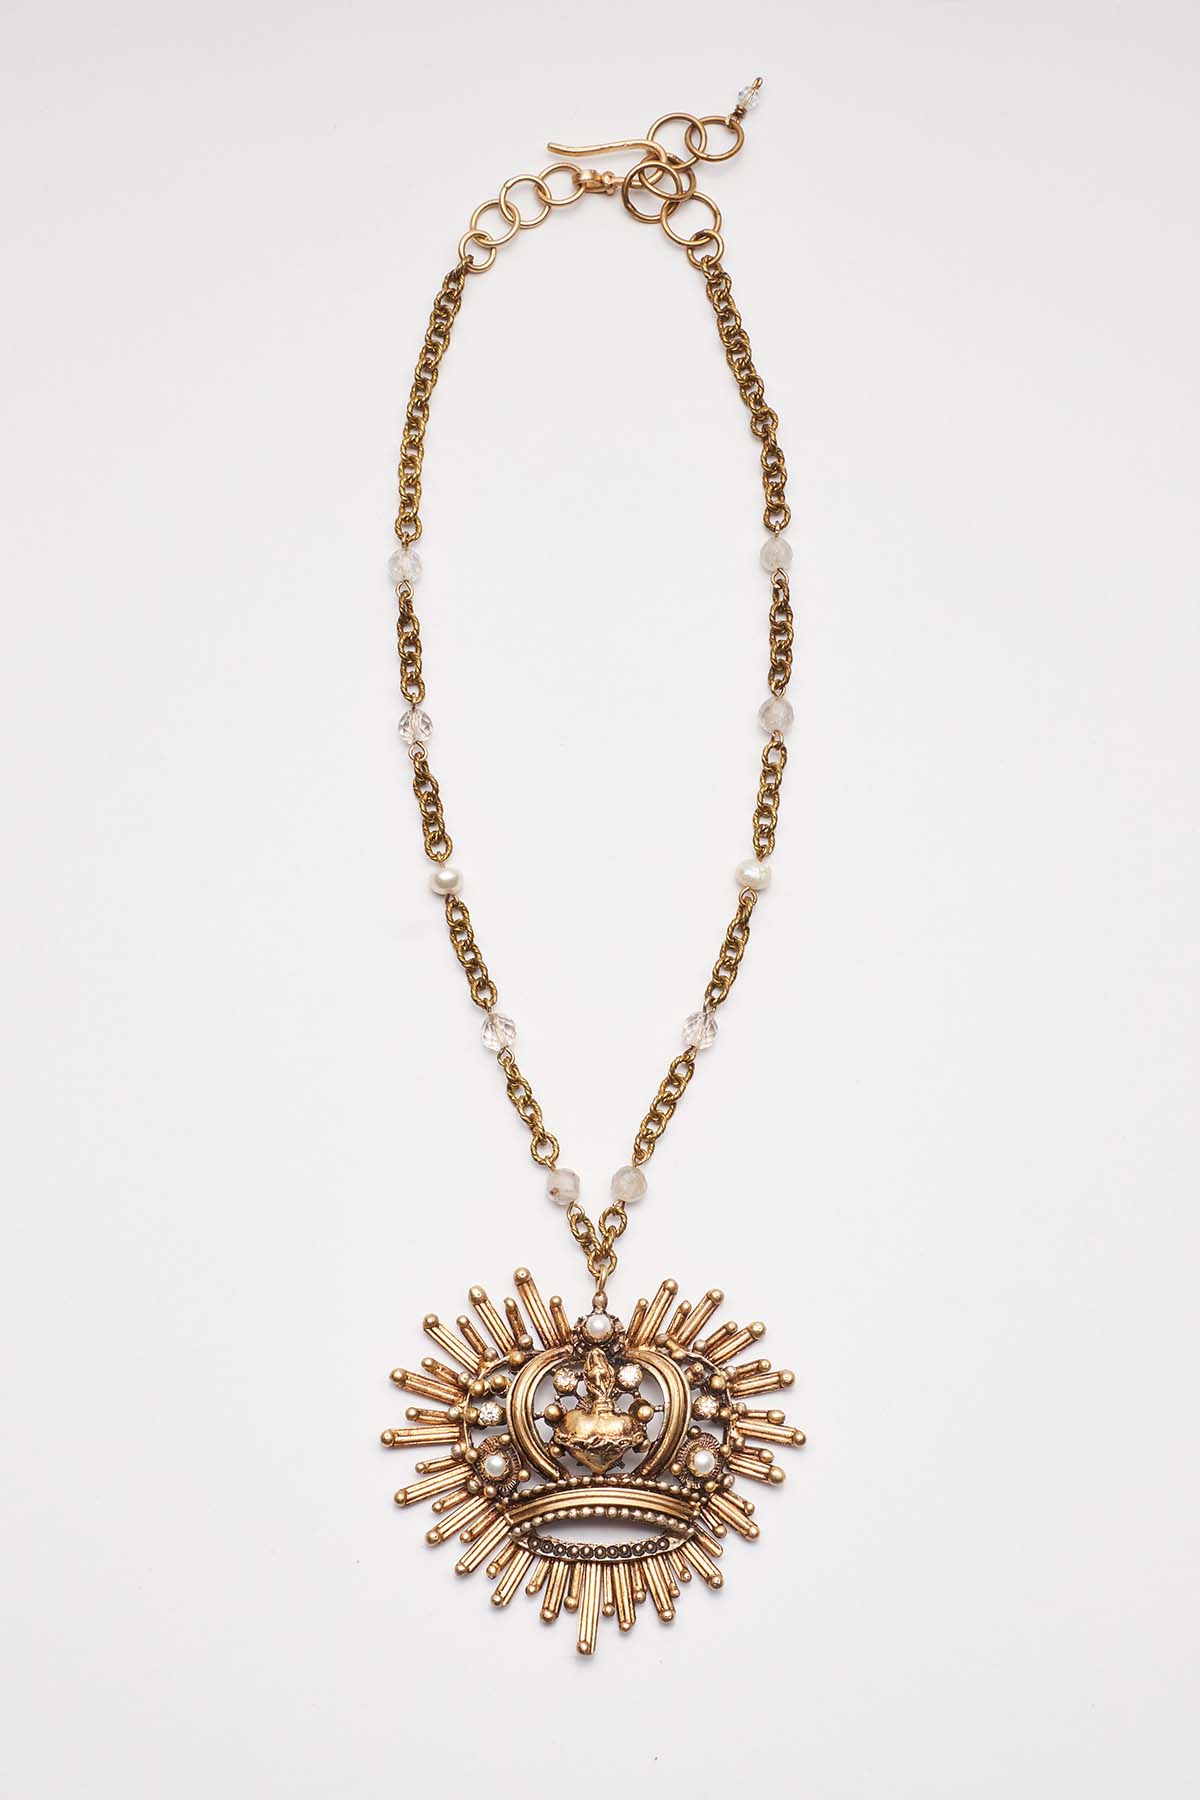 CROWN NECKLACE IN BRONZE AND CRYSTALS